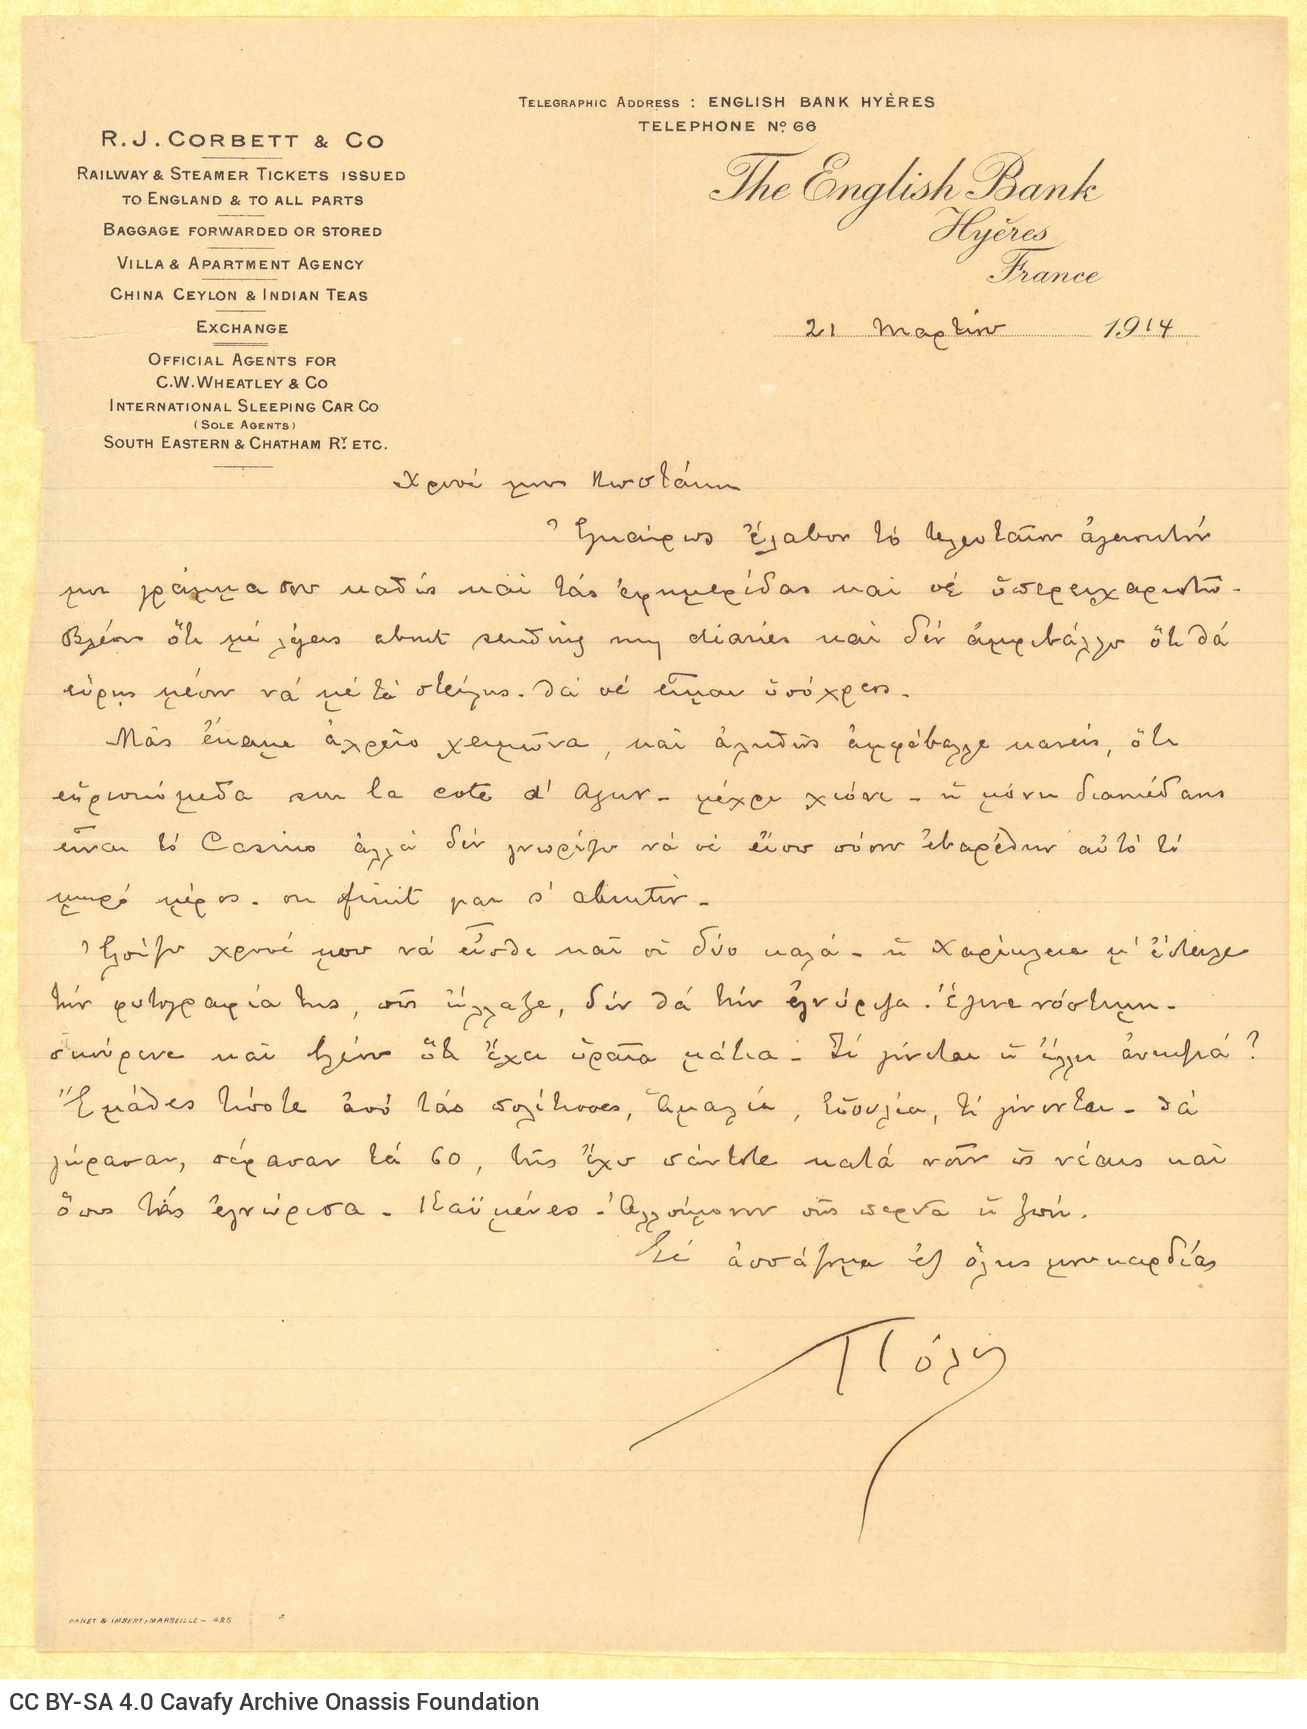 Handwritten letter by Paul Cavafy to C. P. Cavafy from Hyères, France, according to the letterhead. Paul refers to members o